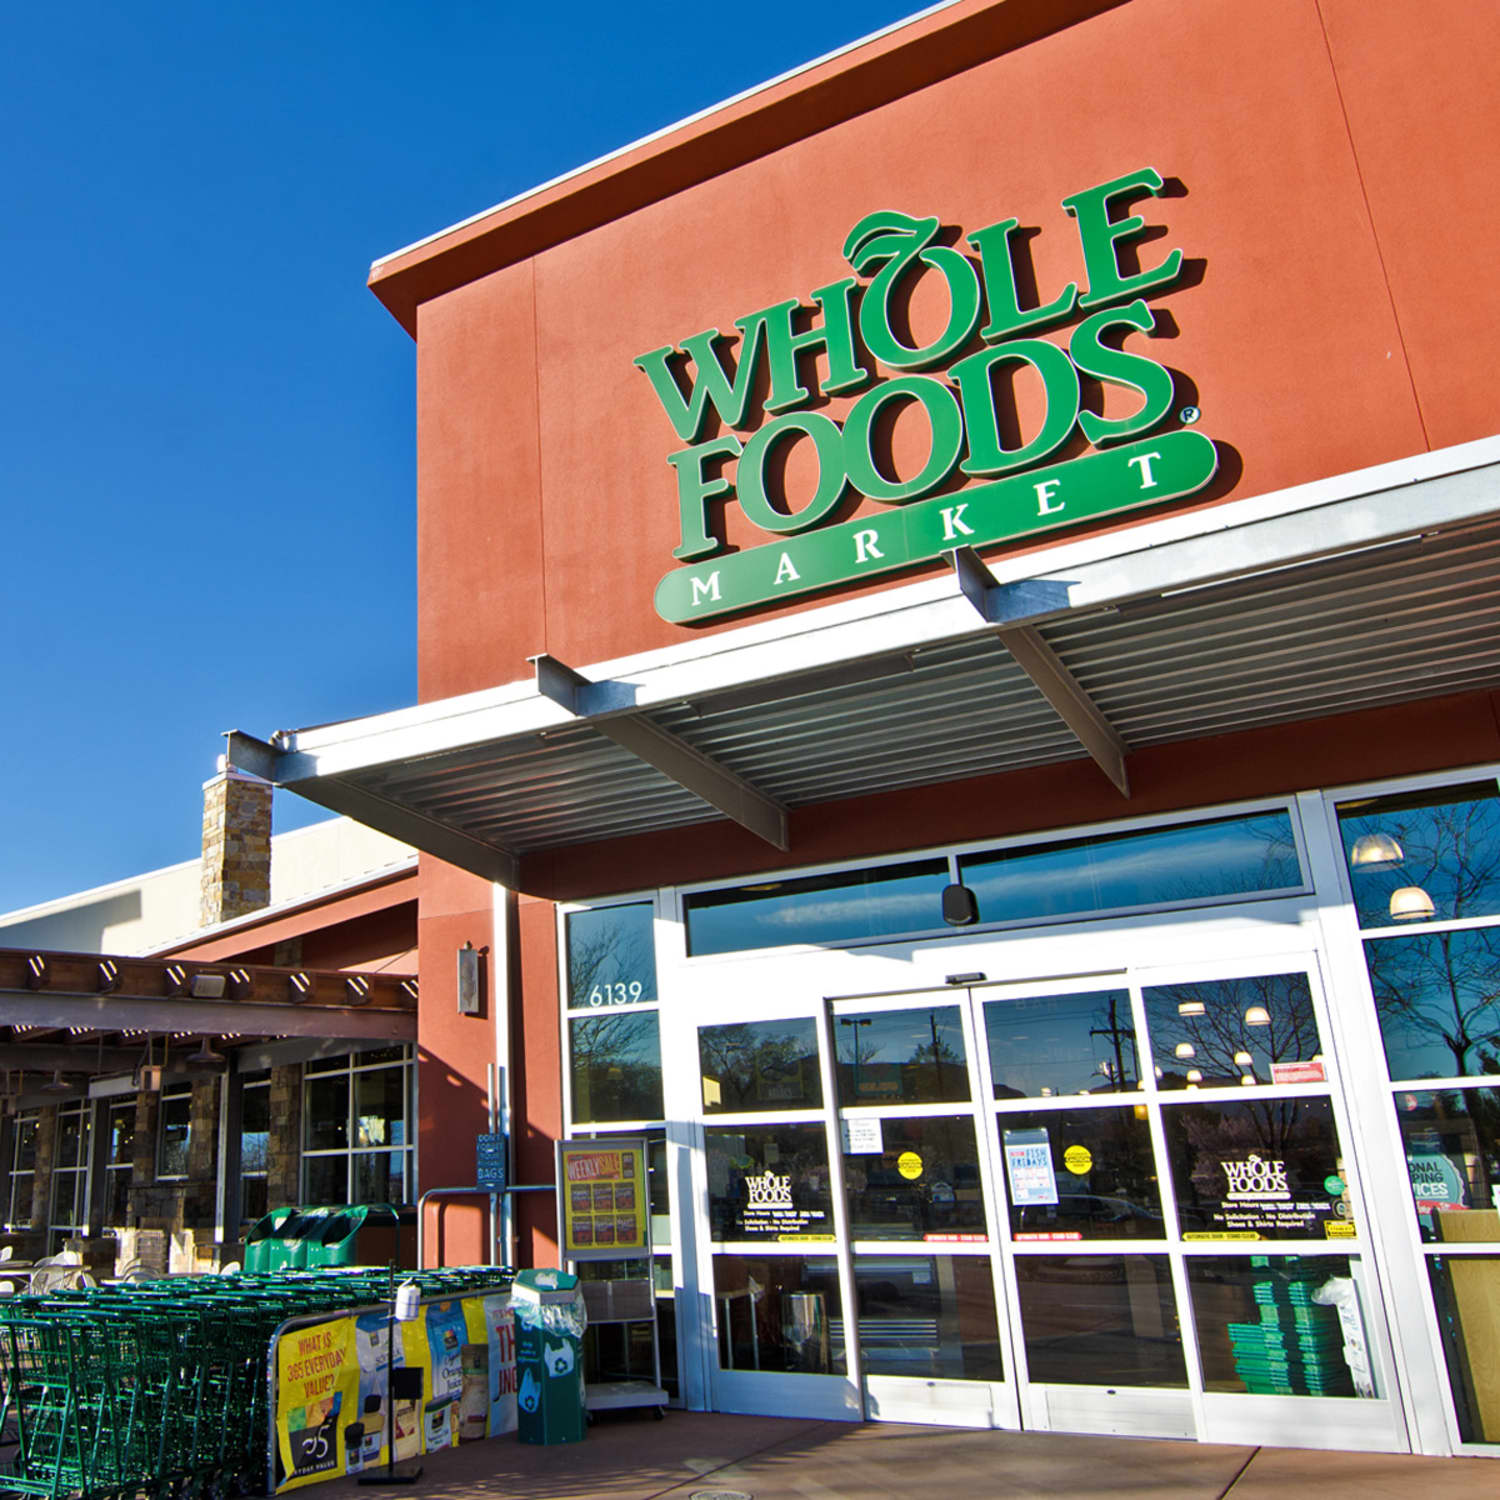 Surprising Facts About Whole Foods